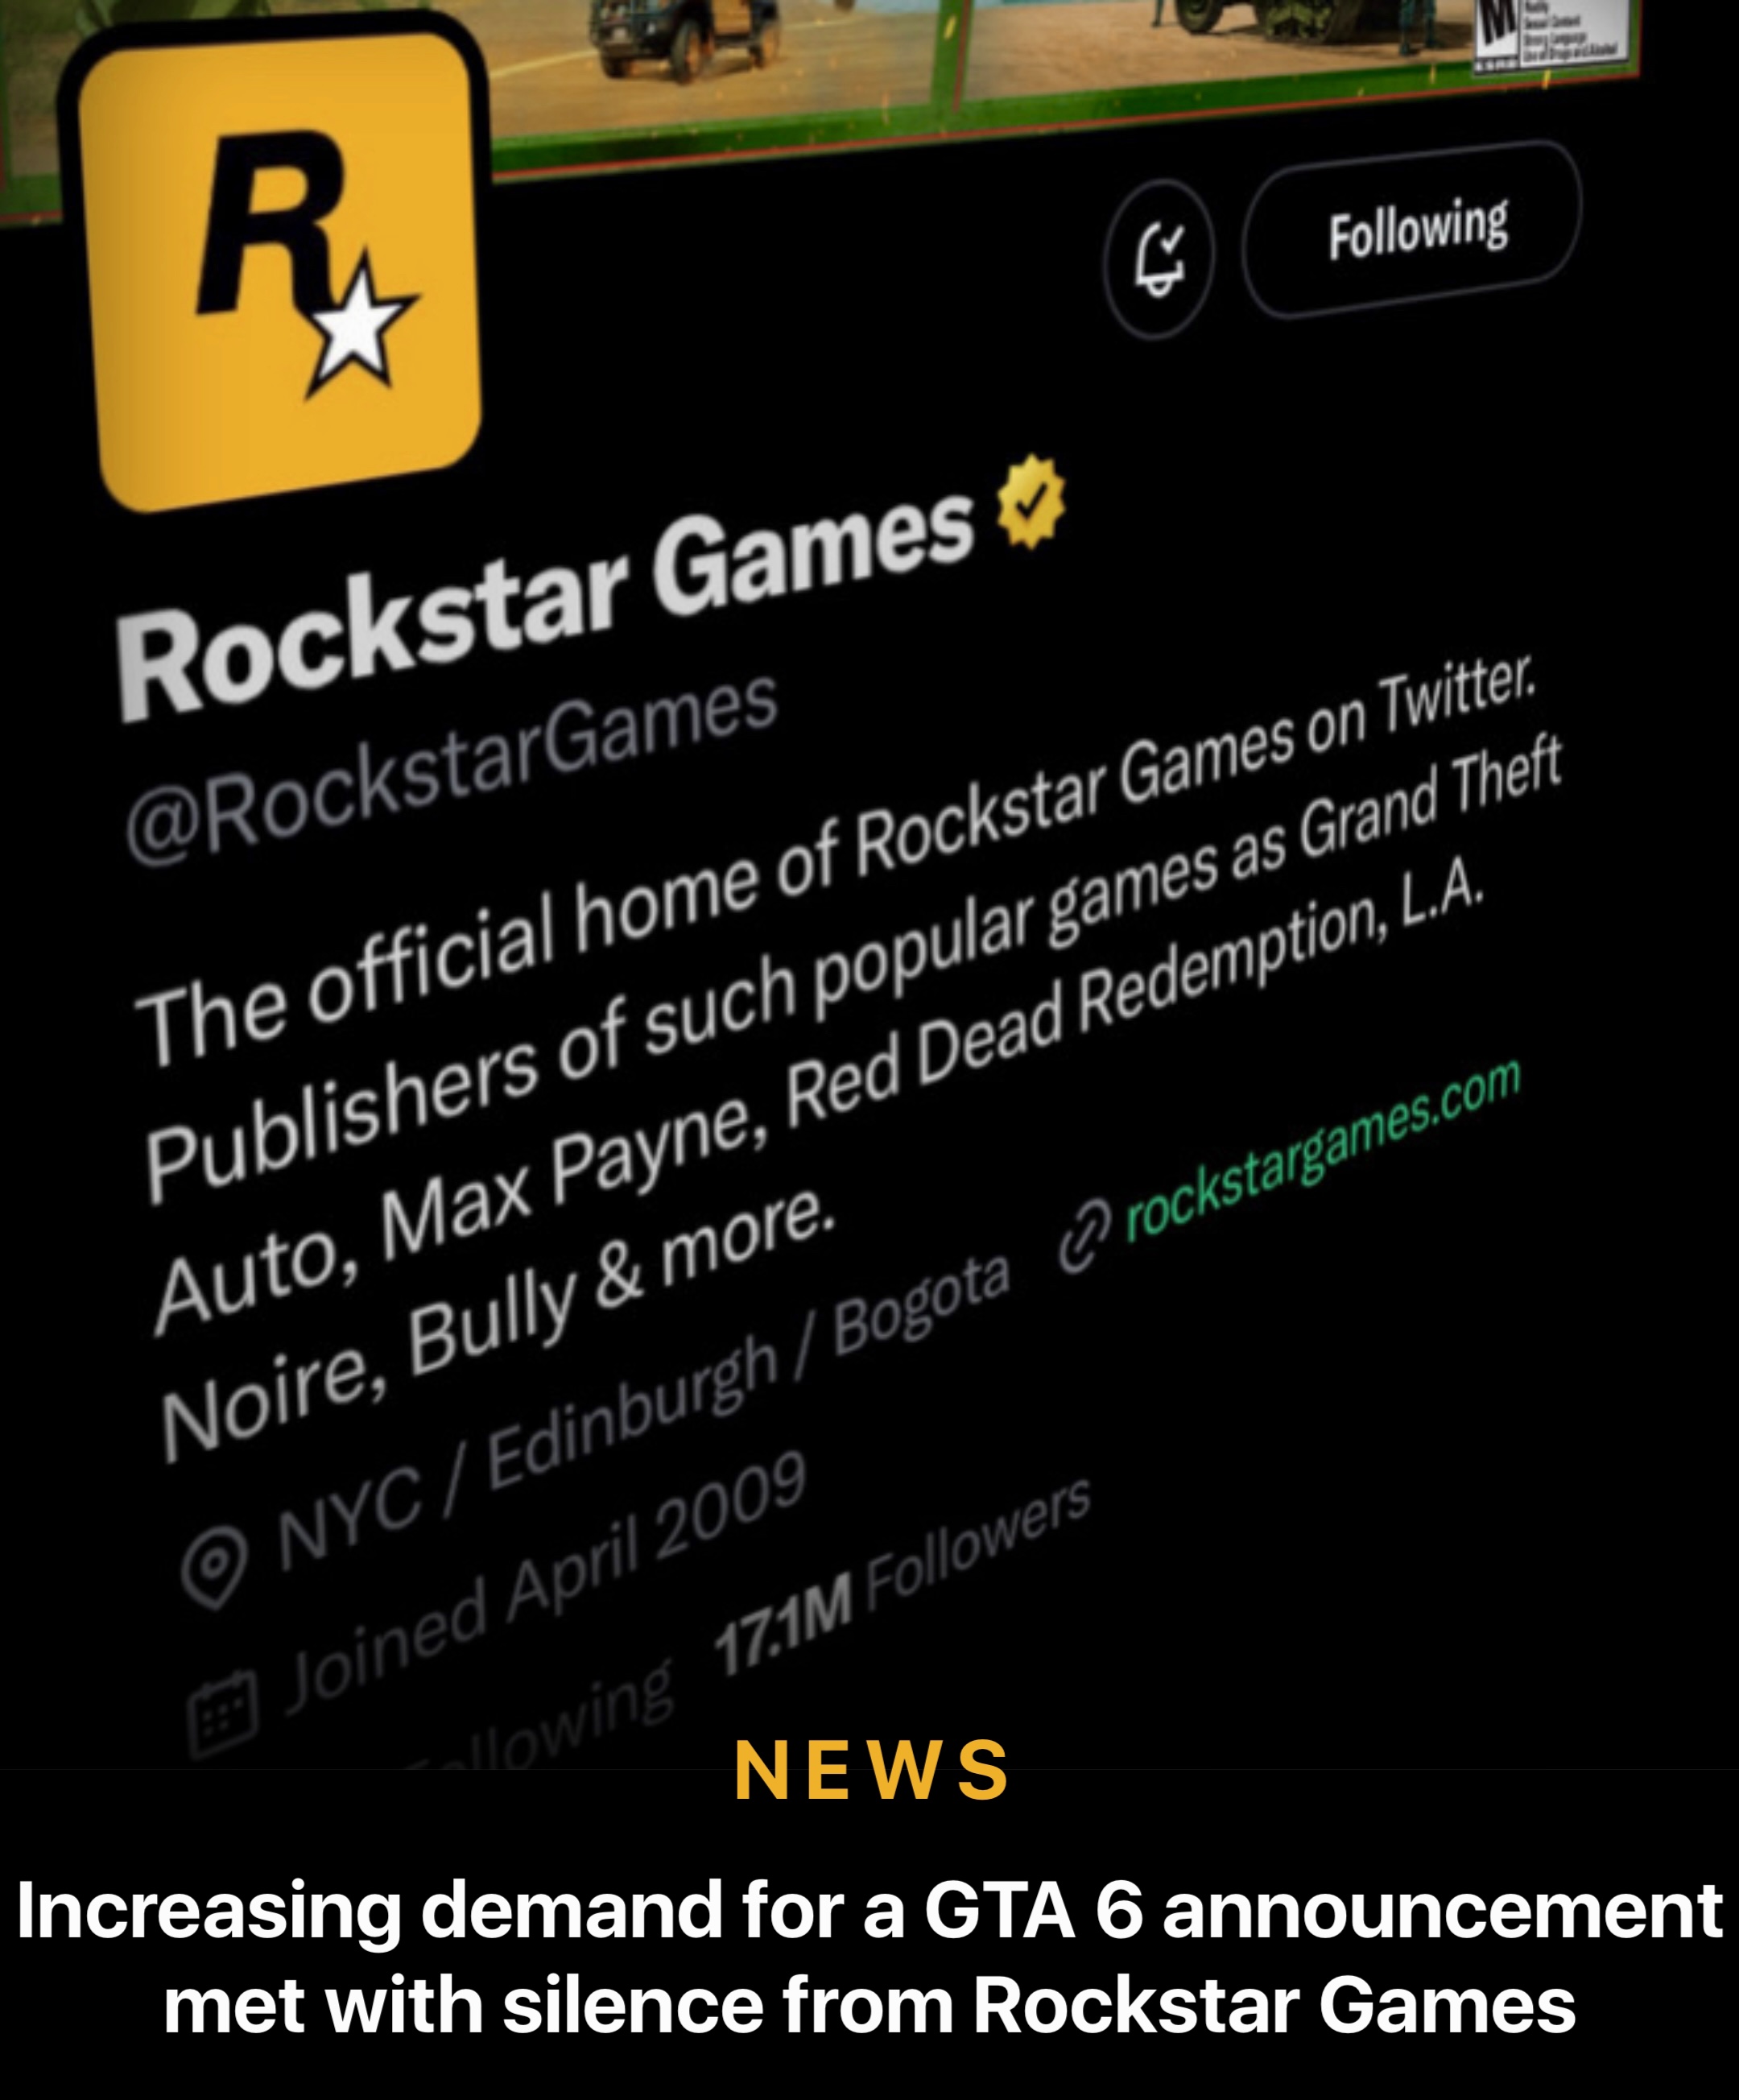 GTA 6 Trailer Countdown ⏳ on X: Rockstars Games is currently